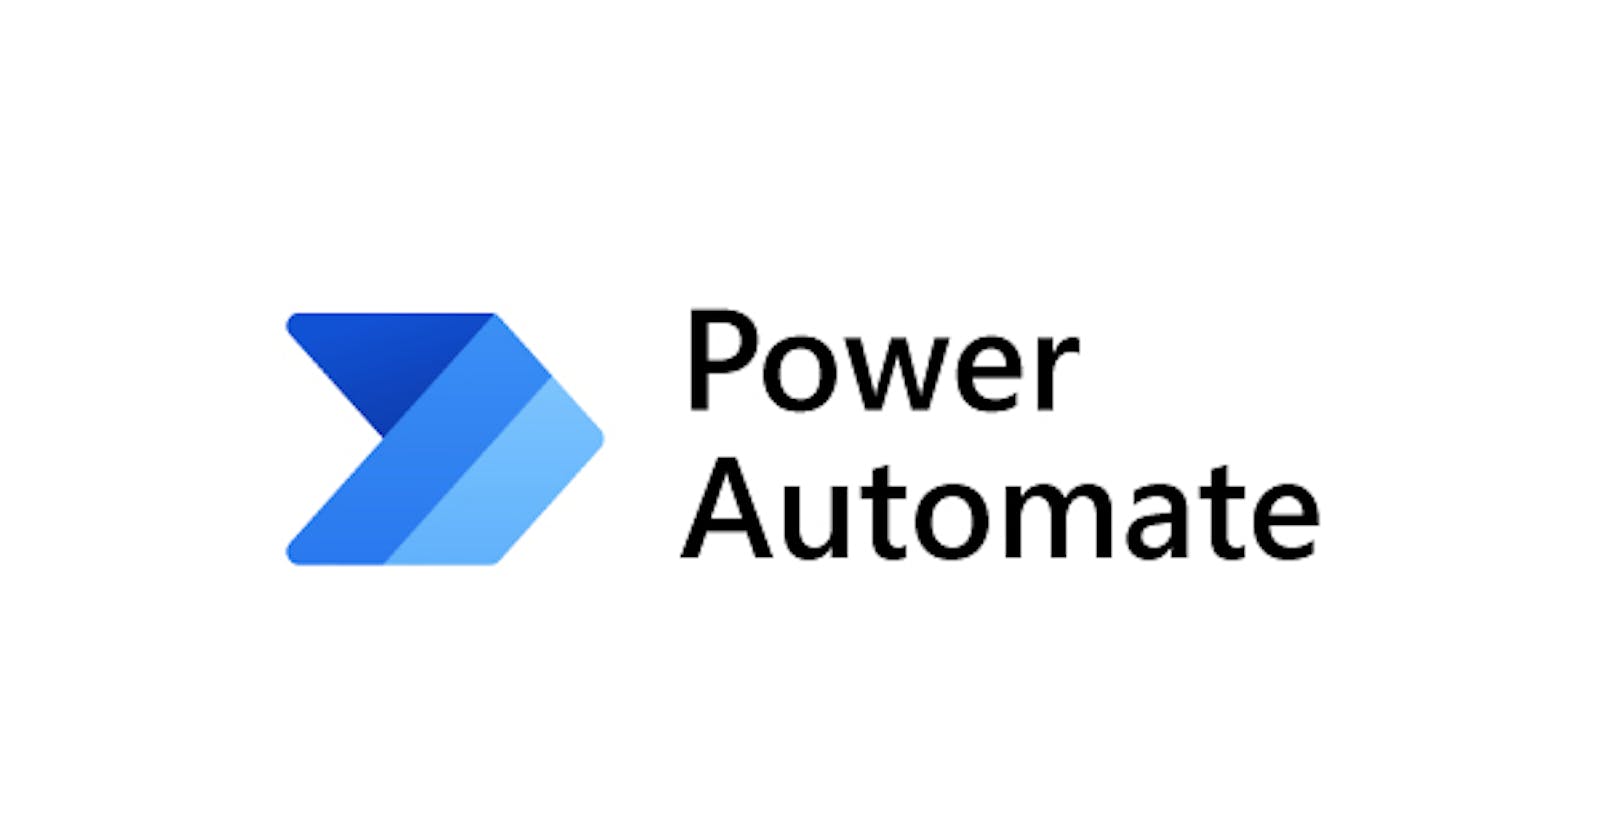 Trigger a message on Microsoft Teams using Power Automate